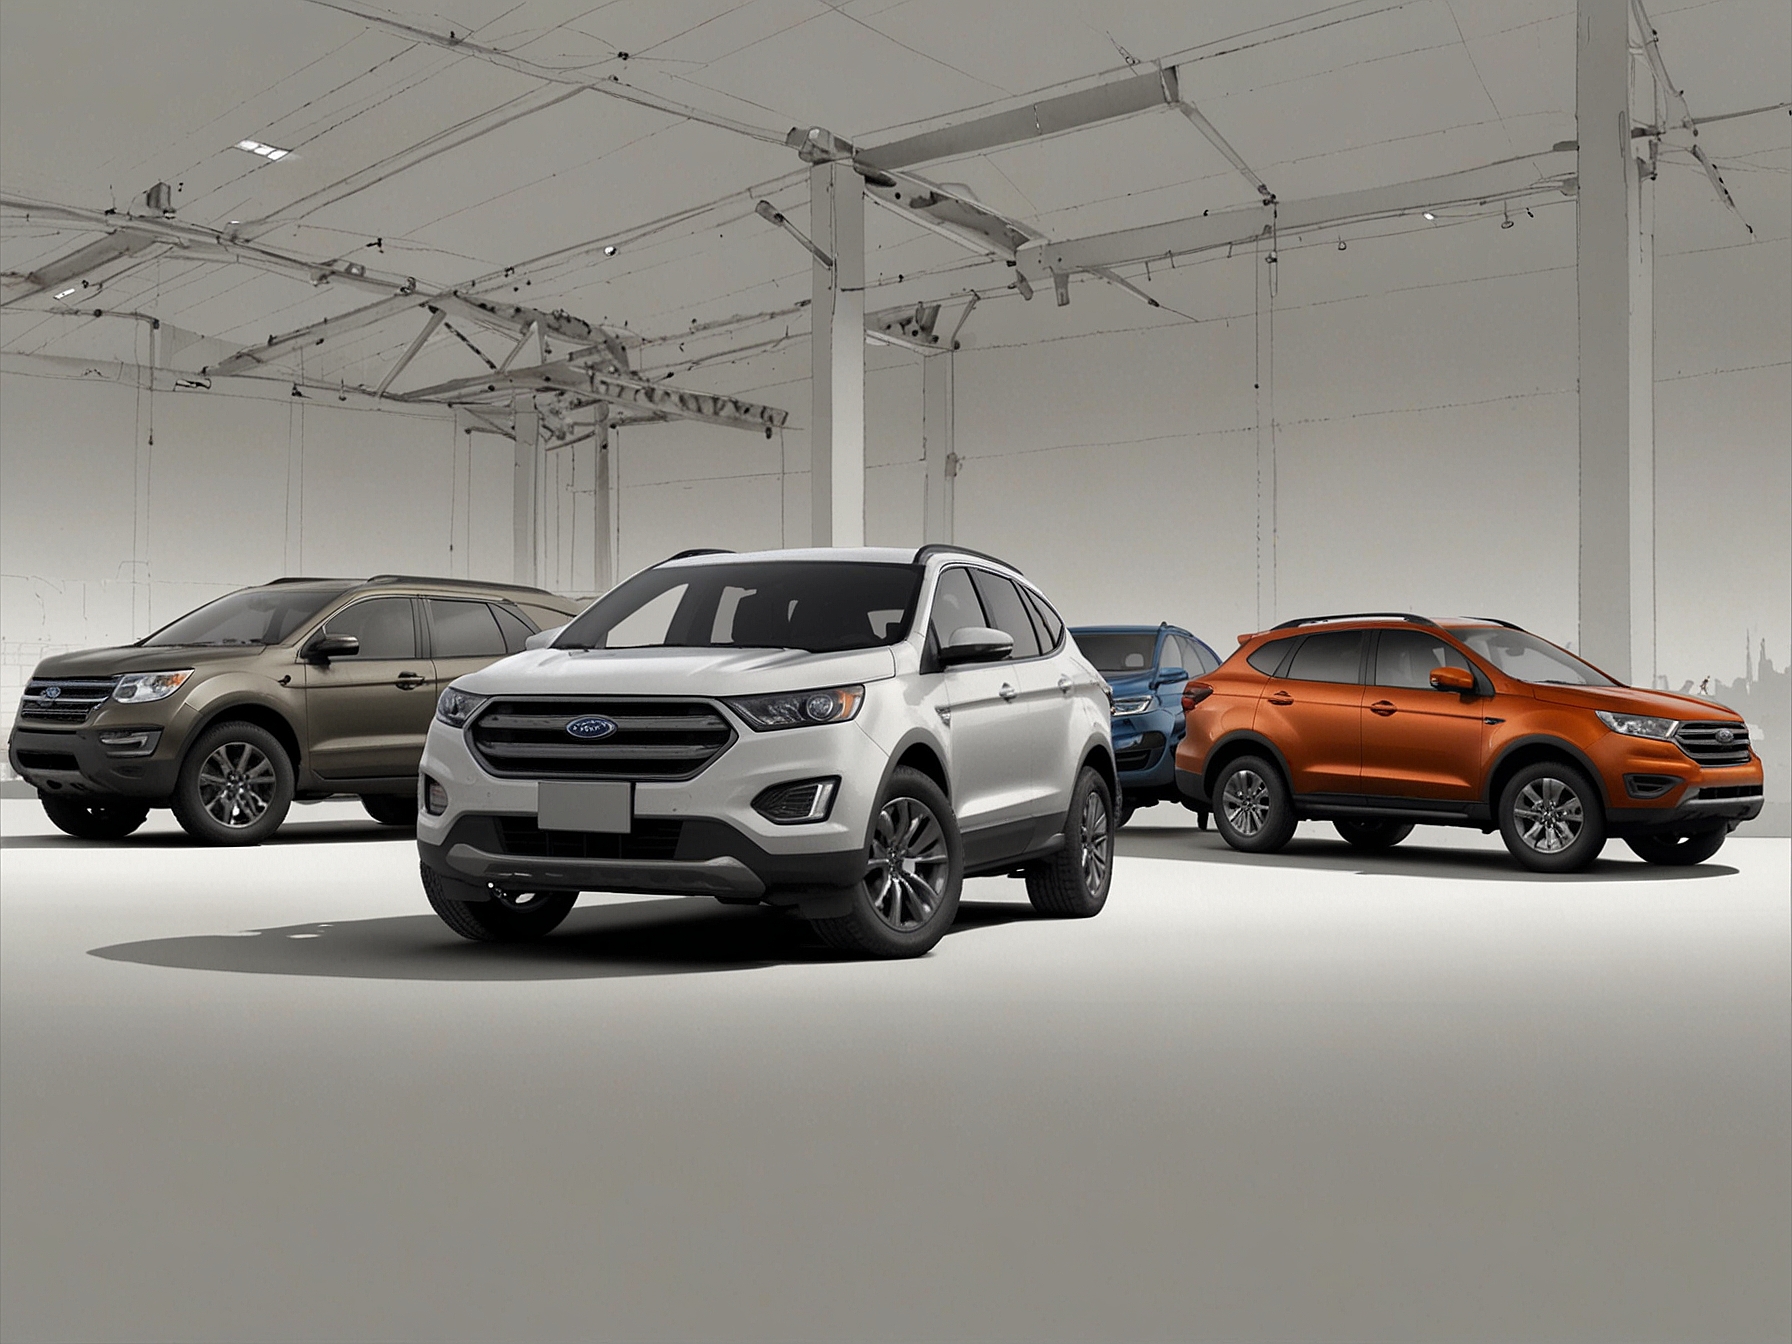 An image of Ford's SUV and truck lineup contrasted with smaller, fuel-efficient cars favored by European consumers, illustrating the brand's market misalignment.